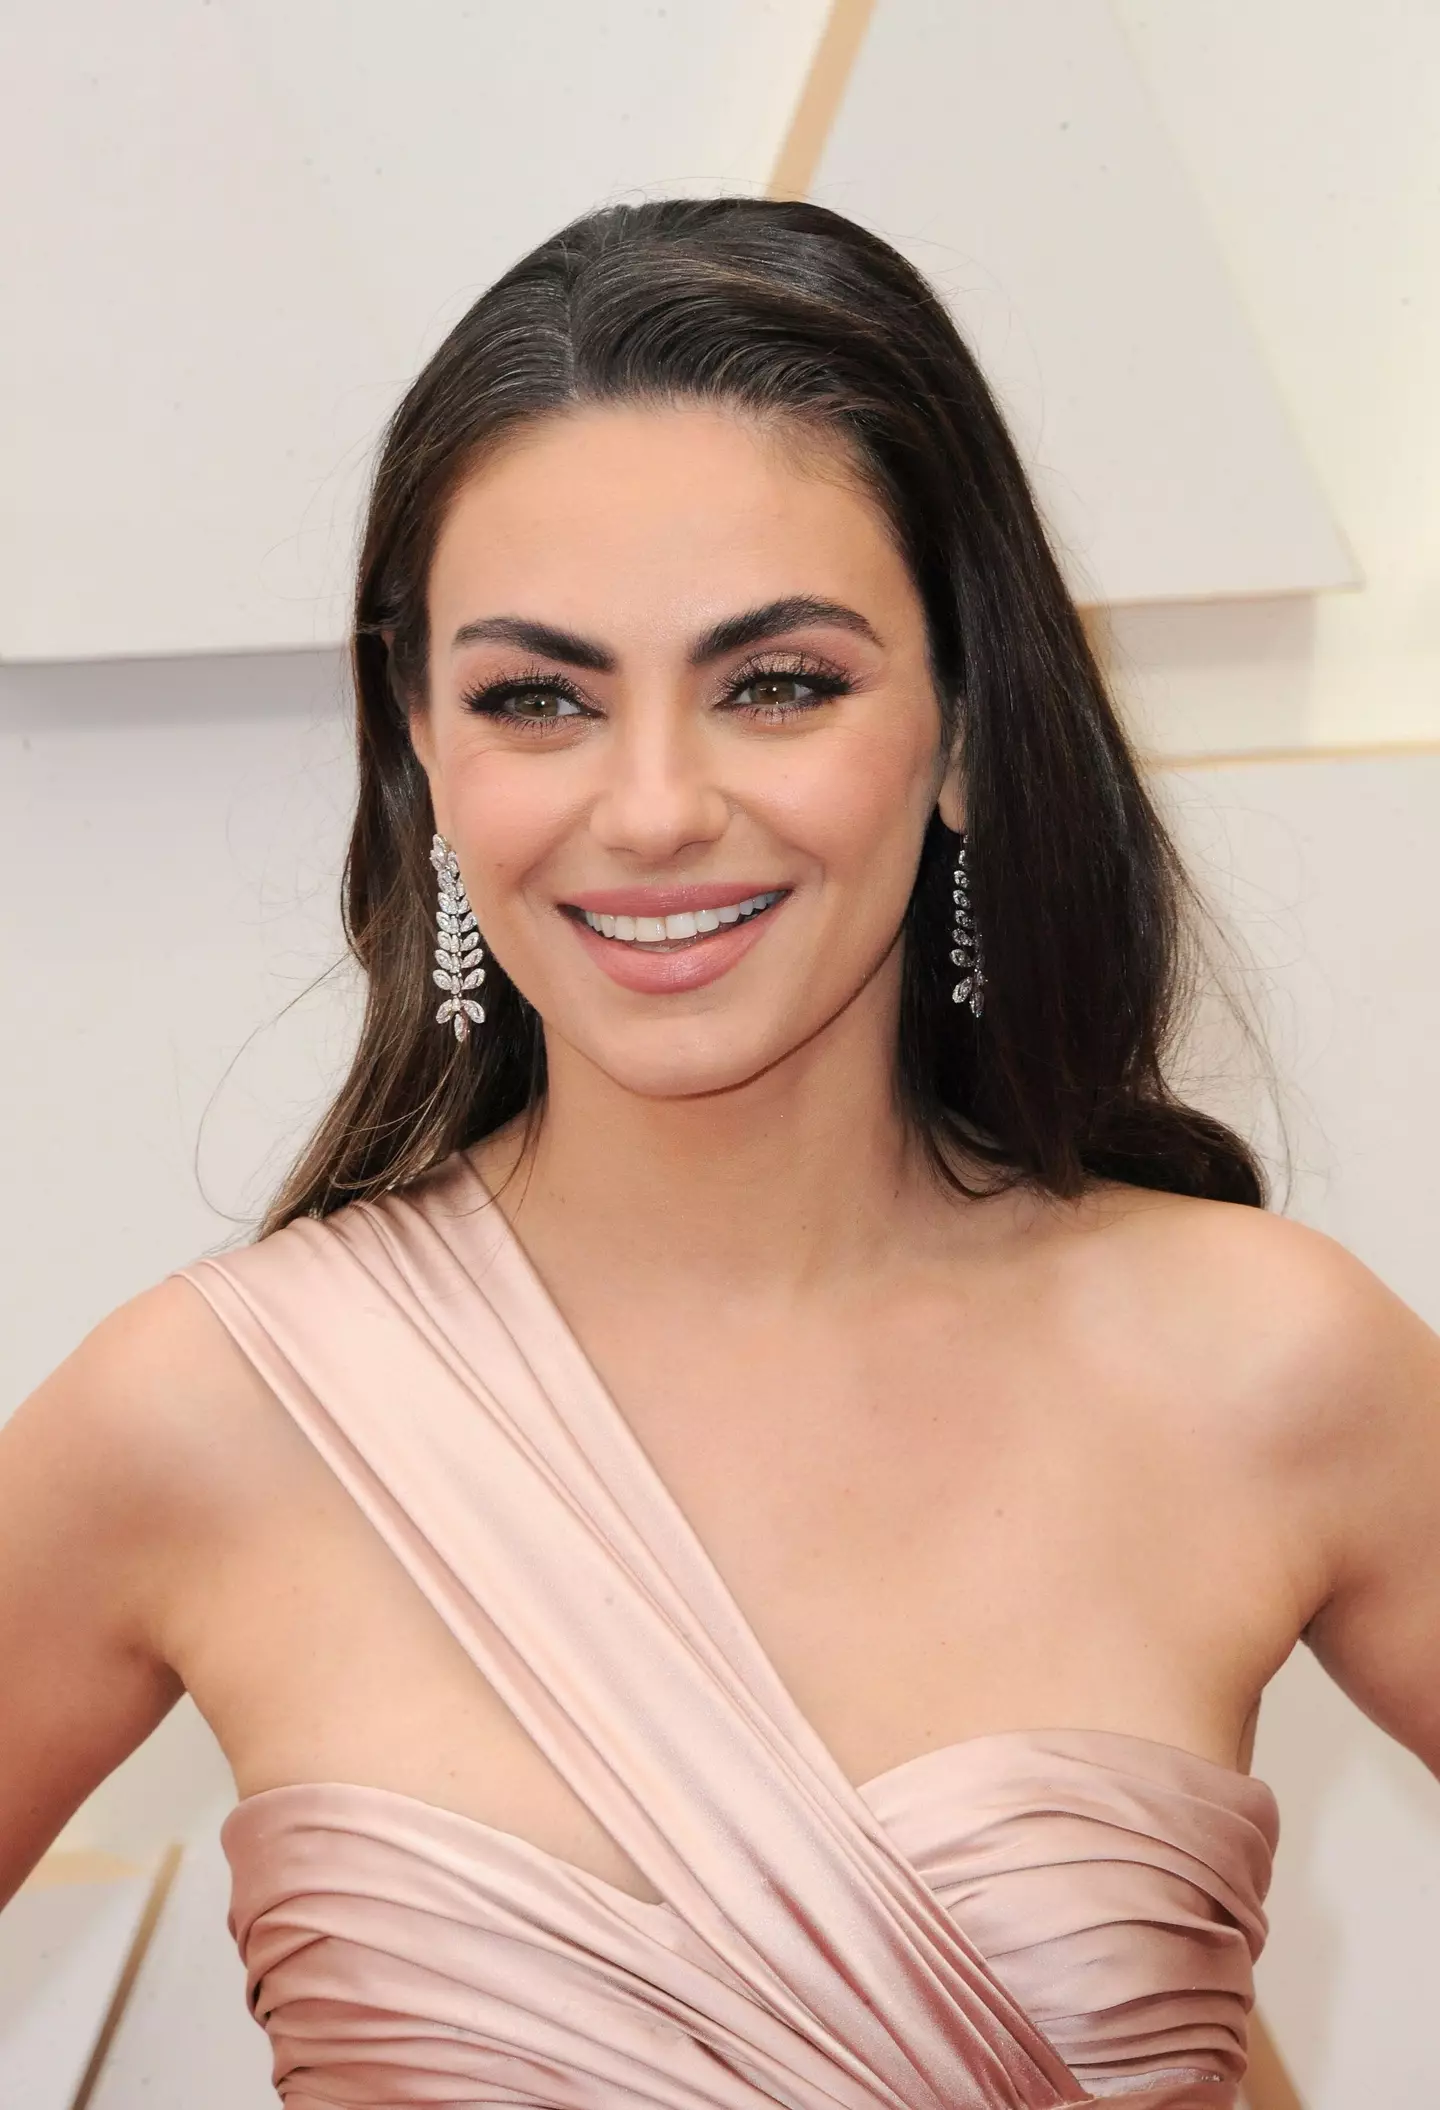 Mila Kunis at the Oscars earlier this year.